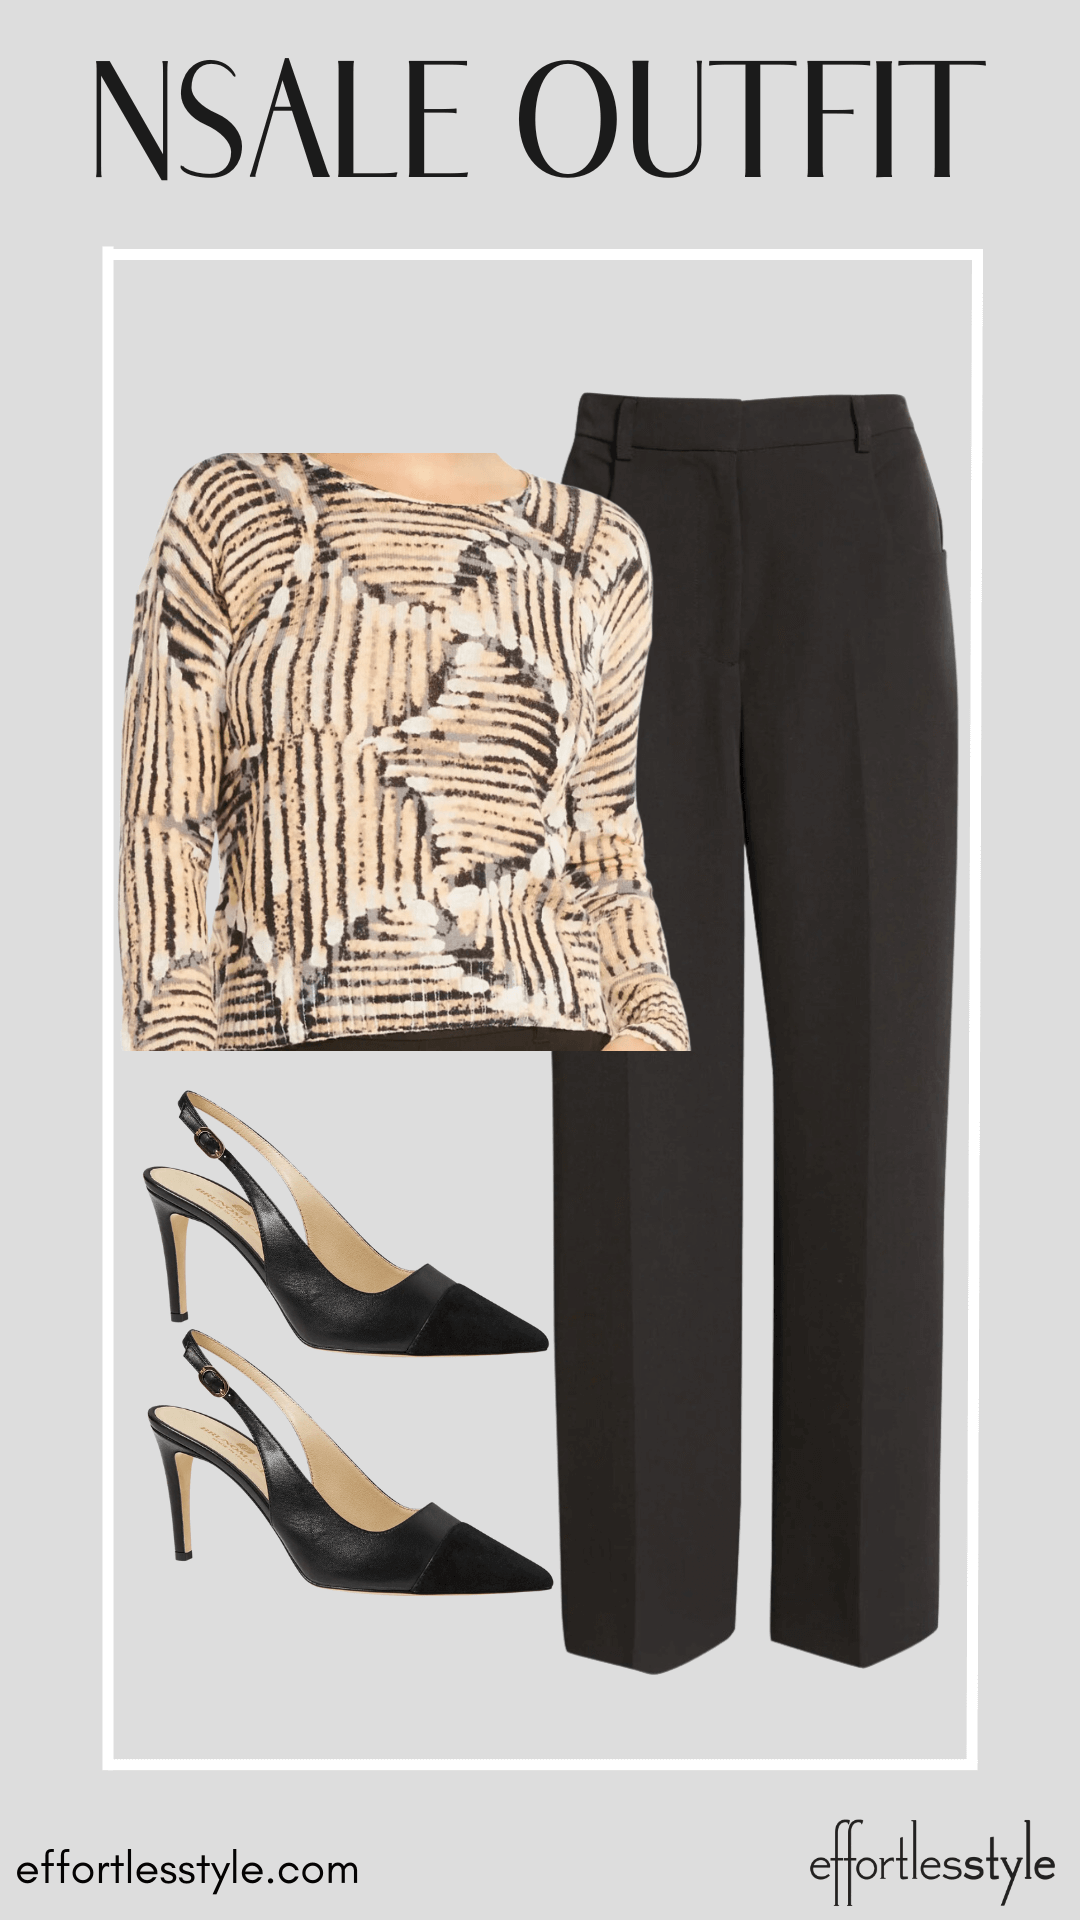 Workwear Outfit Ideas From The NSale Public Access Abstract Printed Sweater & Black Pants the best pieces for work in the Nordstrom Sale how to style a printed sweater for the office how to wear a sweater and pants to work the best shoes in the Nordstrom Anniversary Sale